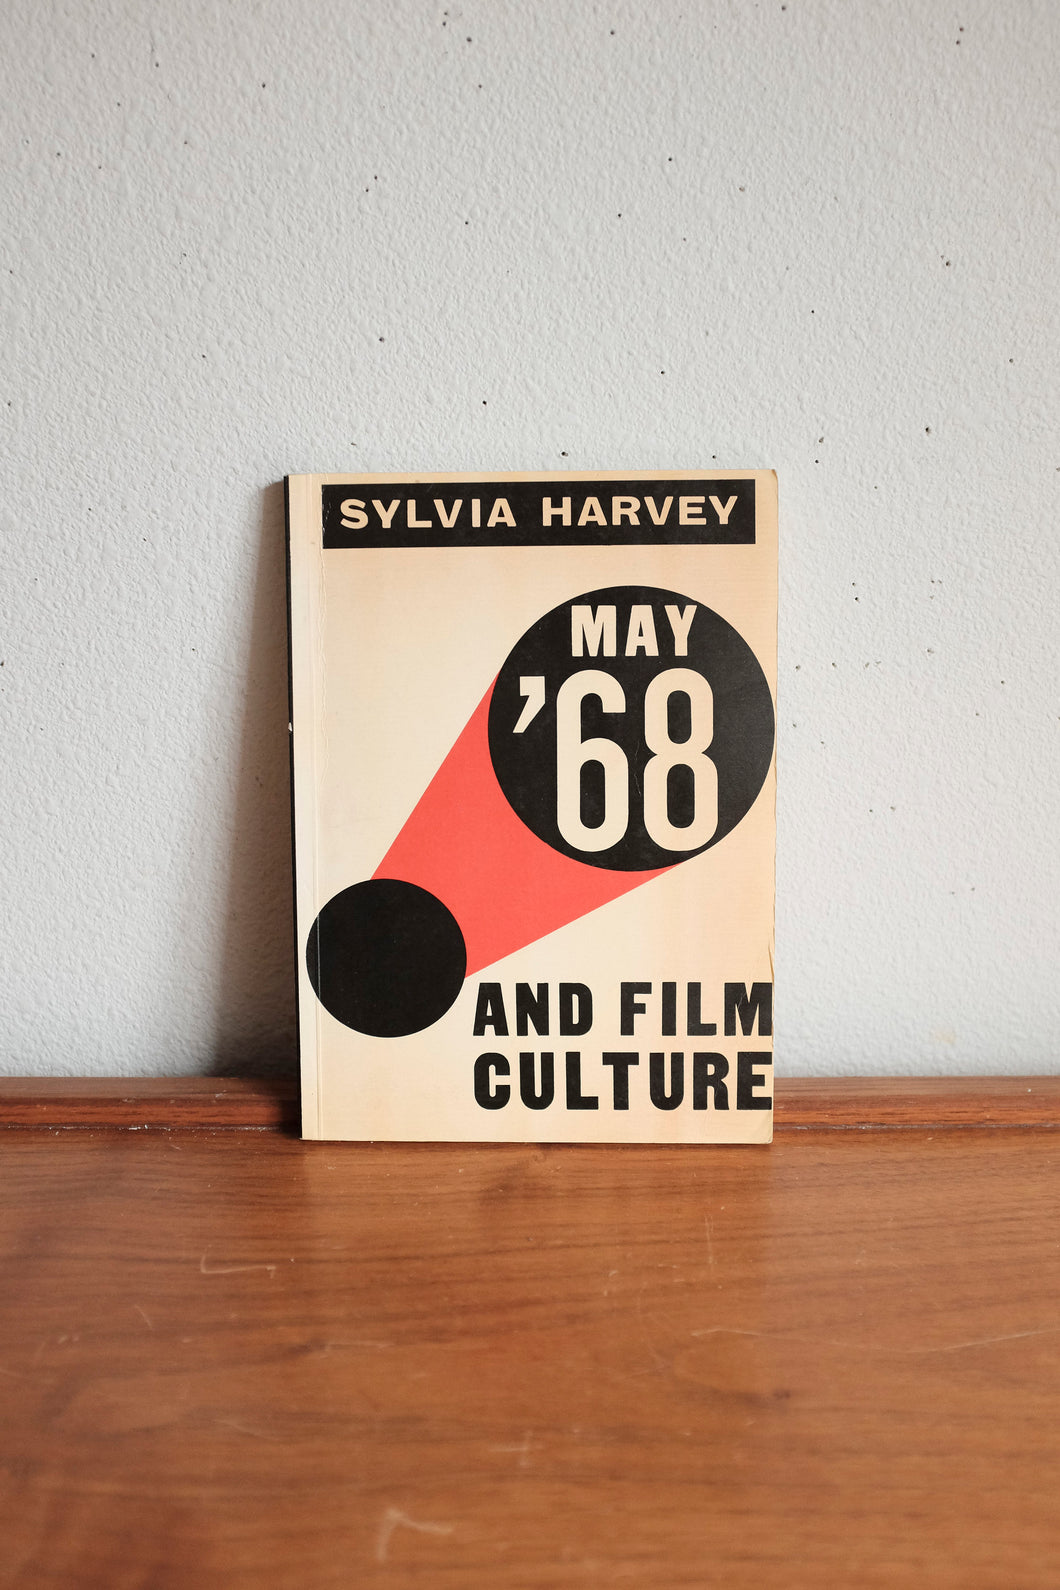 Rare May '68 and Film culture by Sylvia Harvey